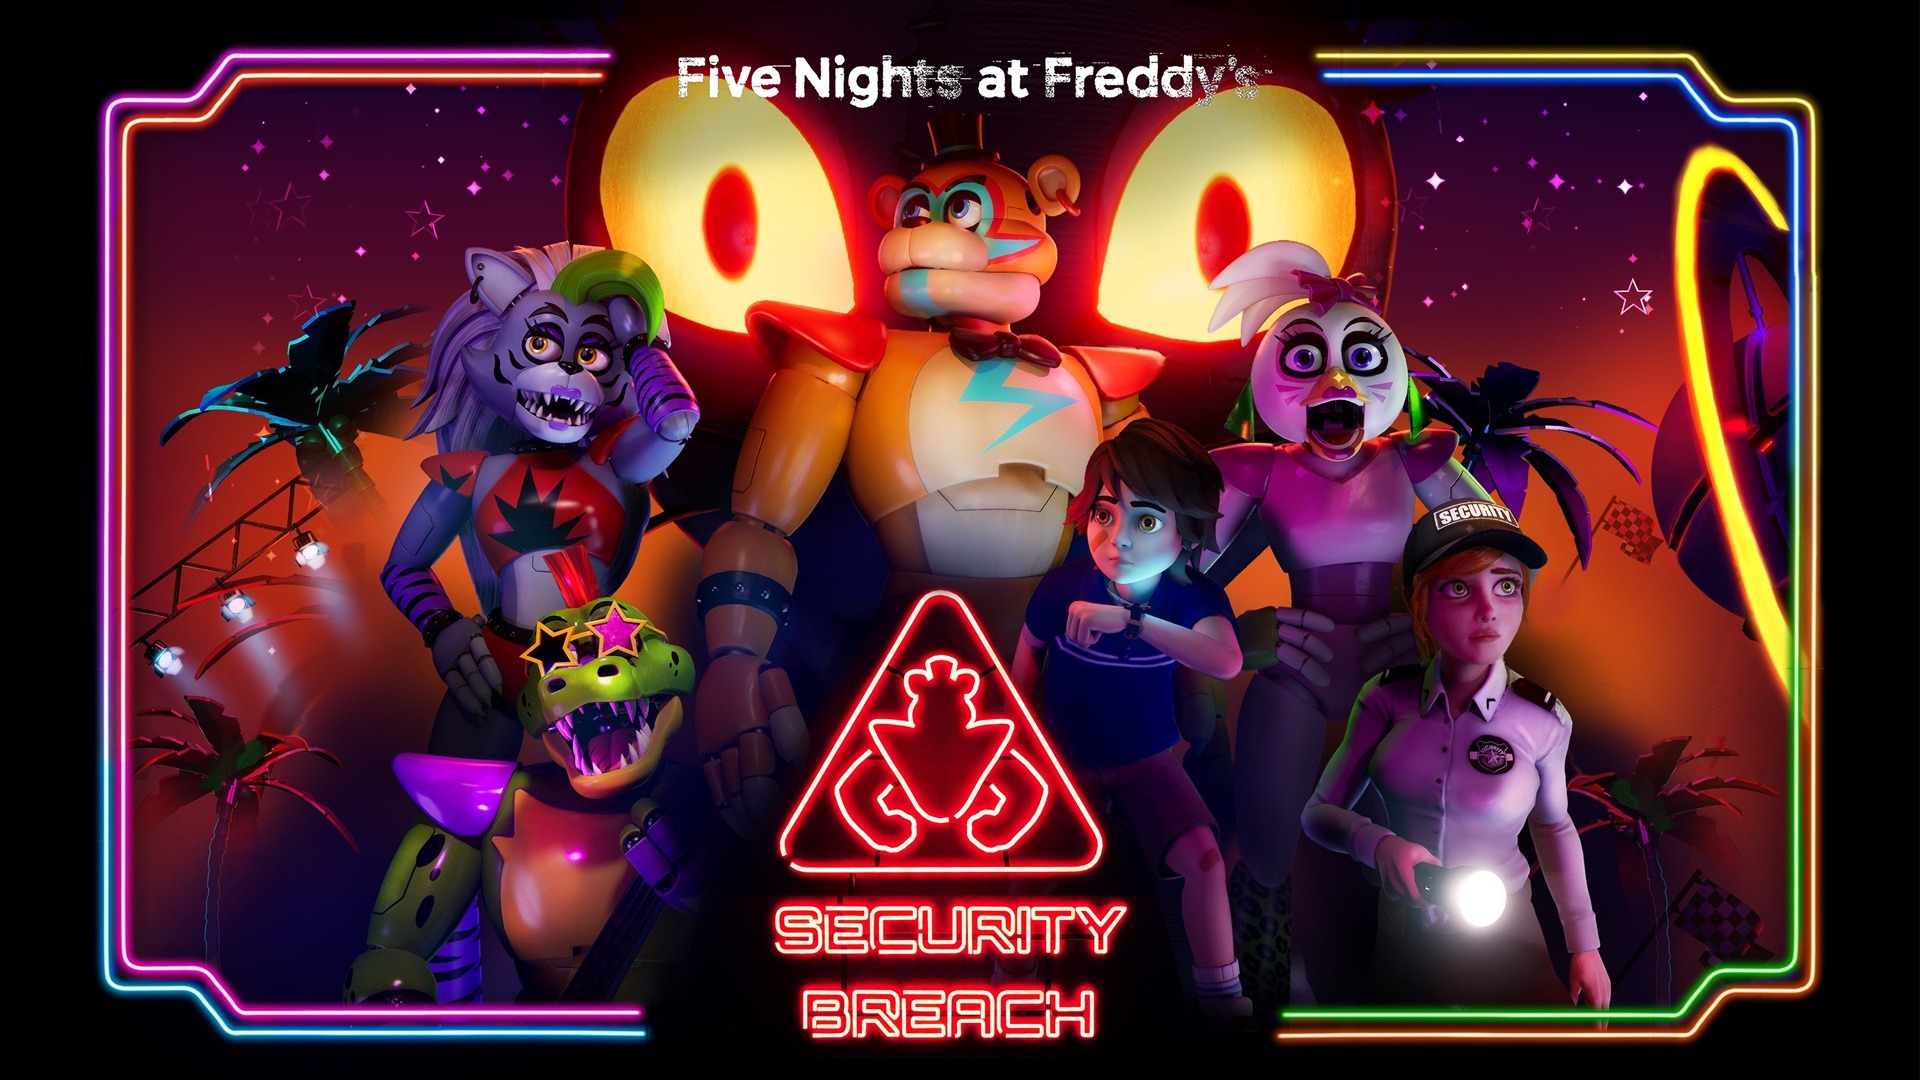 PS5/PS4日本語パッケージ版『Five Nights at Freddy's: Security Breach』発売！ | Game*Spark  - 国内・海外ゲーム情報サイト